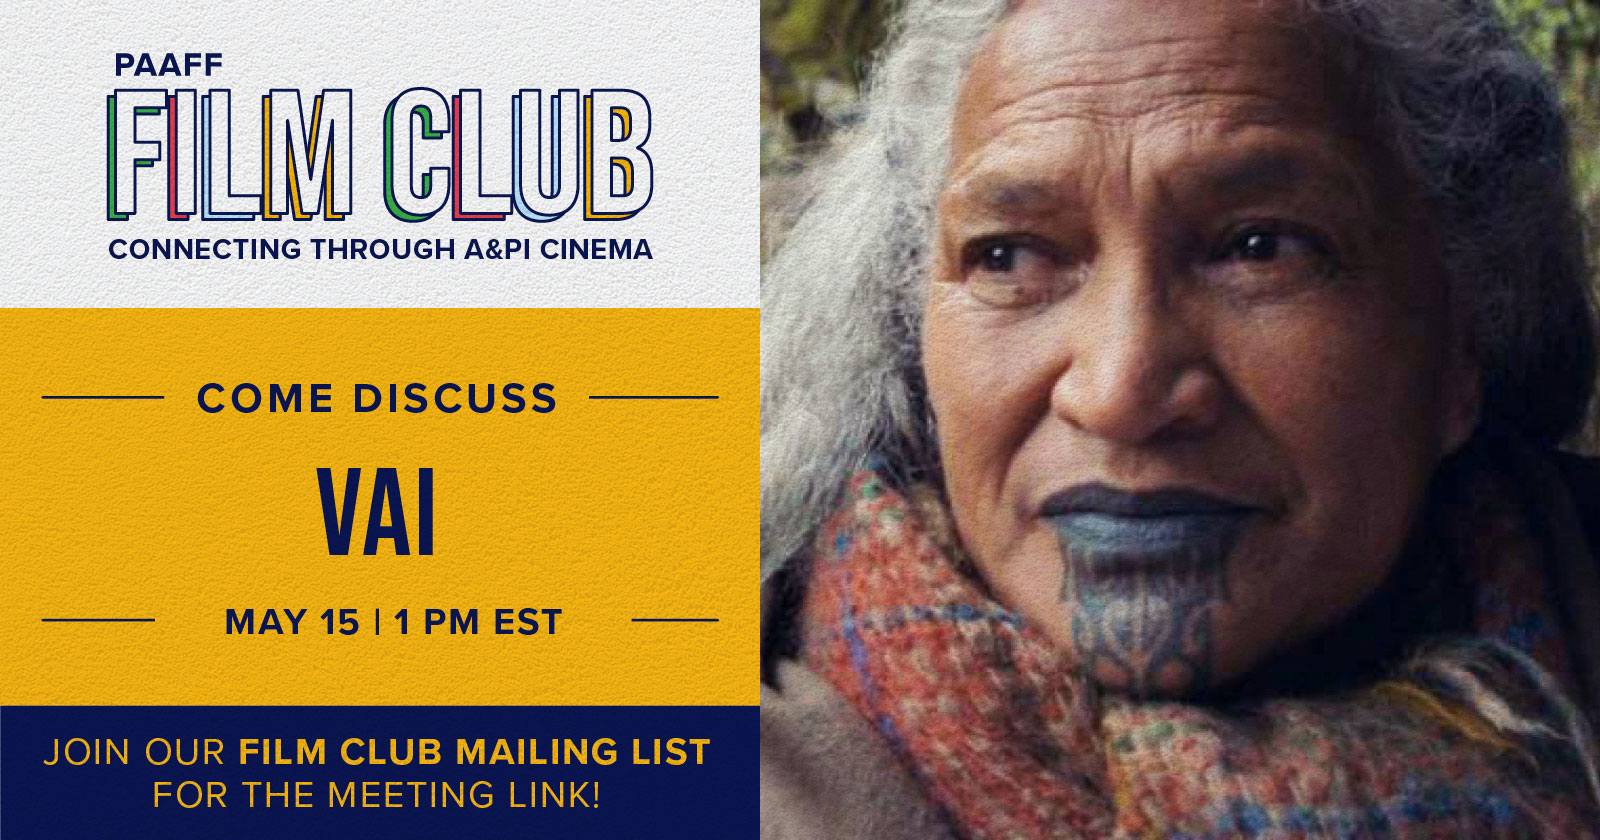 PAAFF May 2022 Film Club Graphic - Reads "Come discuss Vai - May 15 | 1 PM EST. Join our Film Club Mailing List for the meeting link!" Elderly Maori woman with tattooed chin